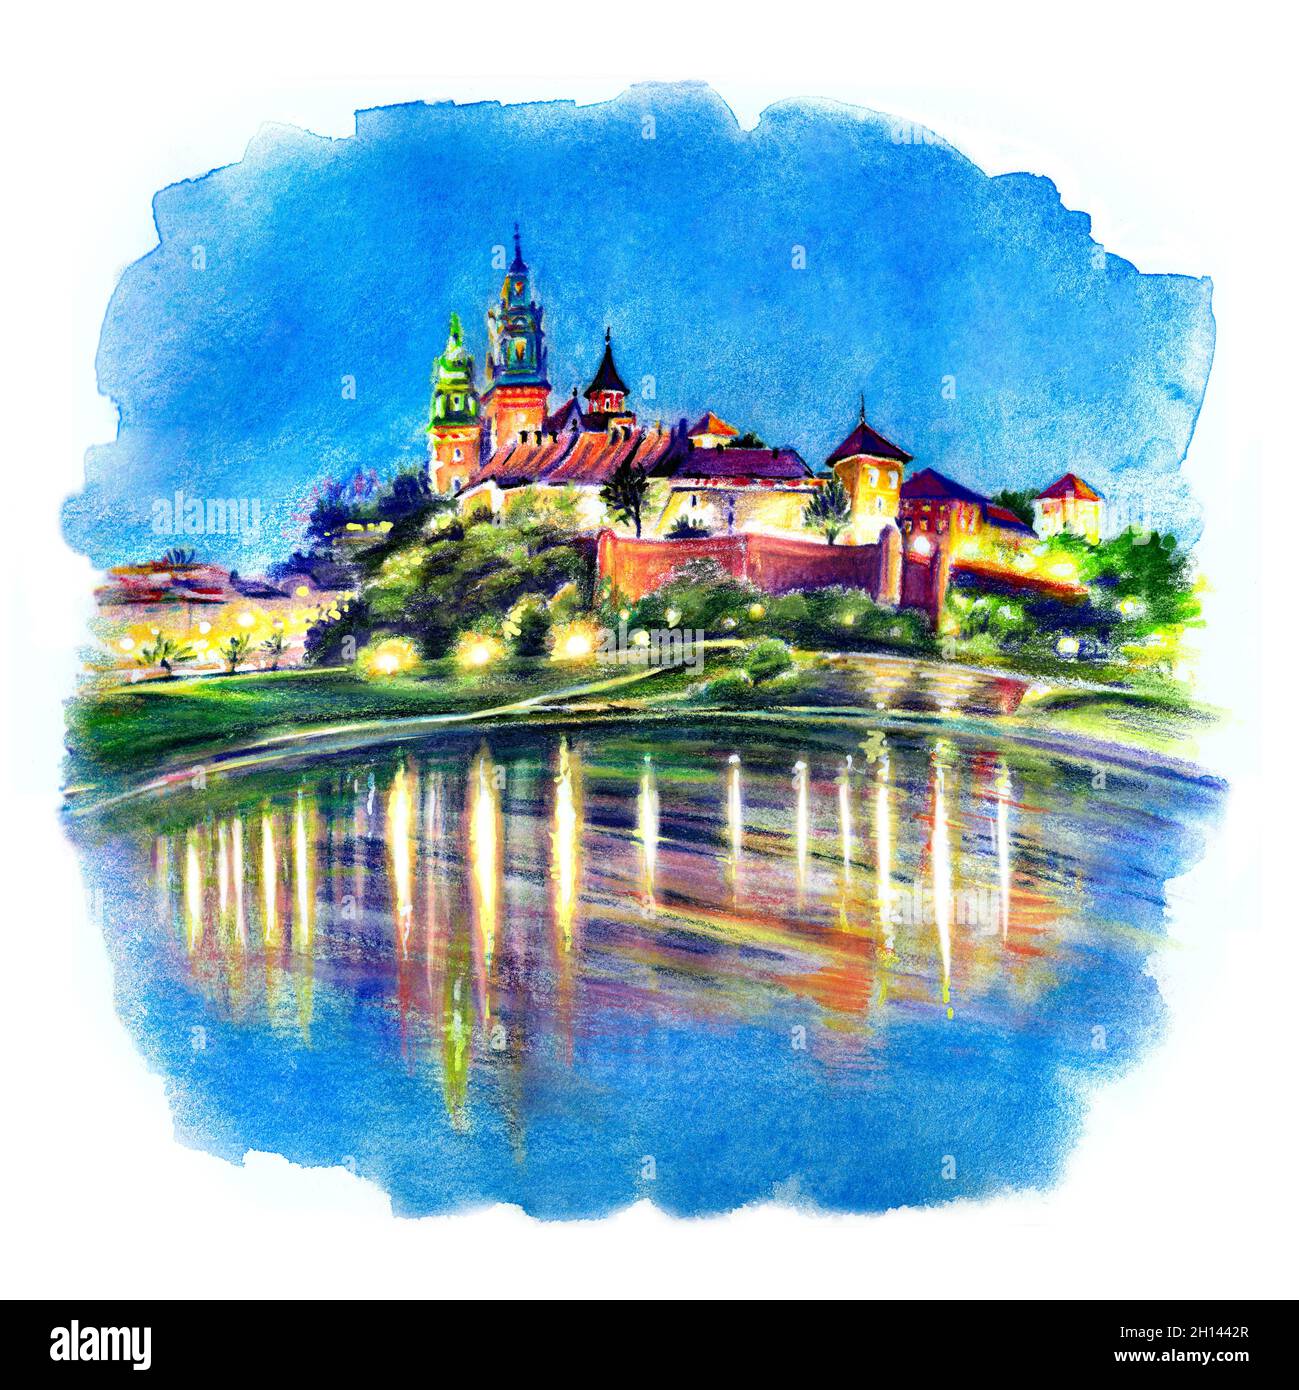 Watercolor sketch of Wawel Castle on Wawel Hill with reflection in the river at night as seen from the Vistula, Krakow, Poland Stock Photo